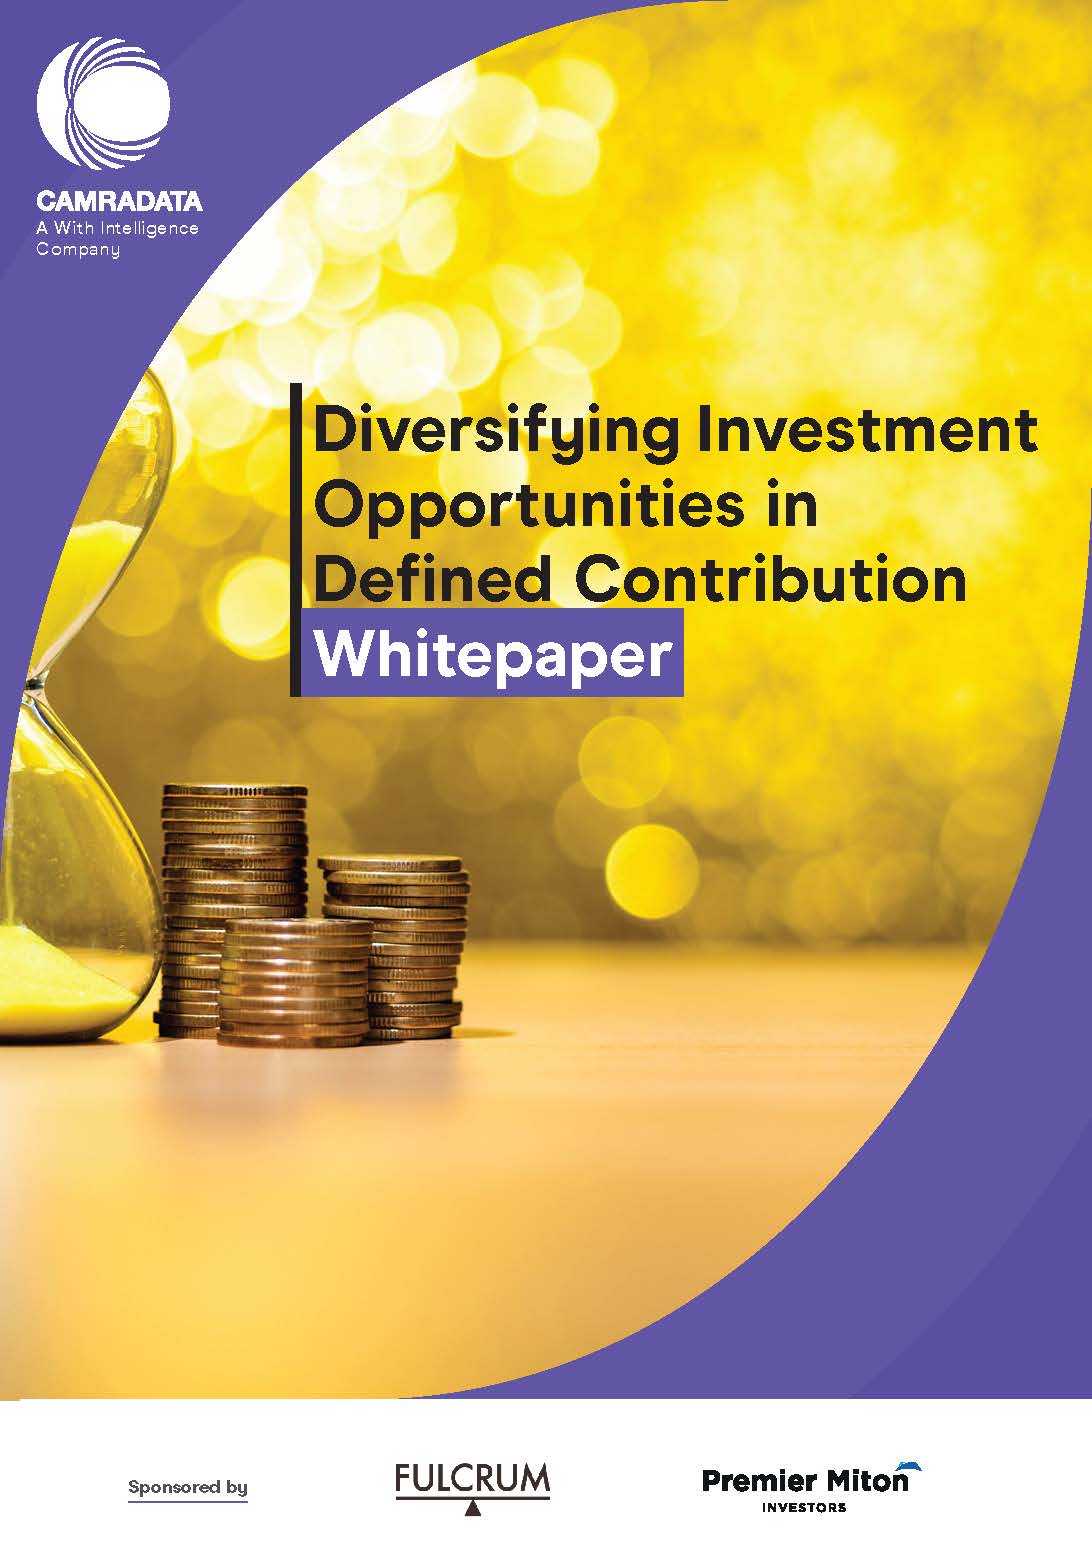 Diversifying Investment Opportunities in Defined Contribution